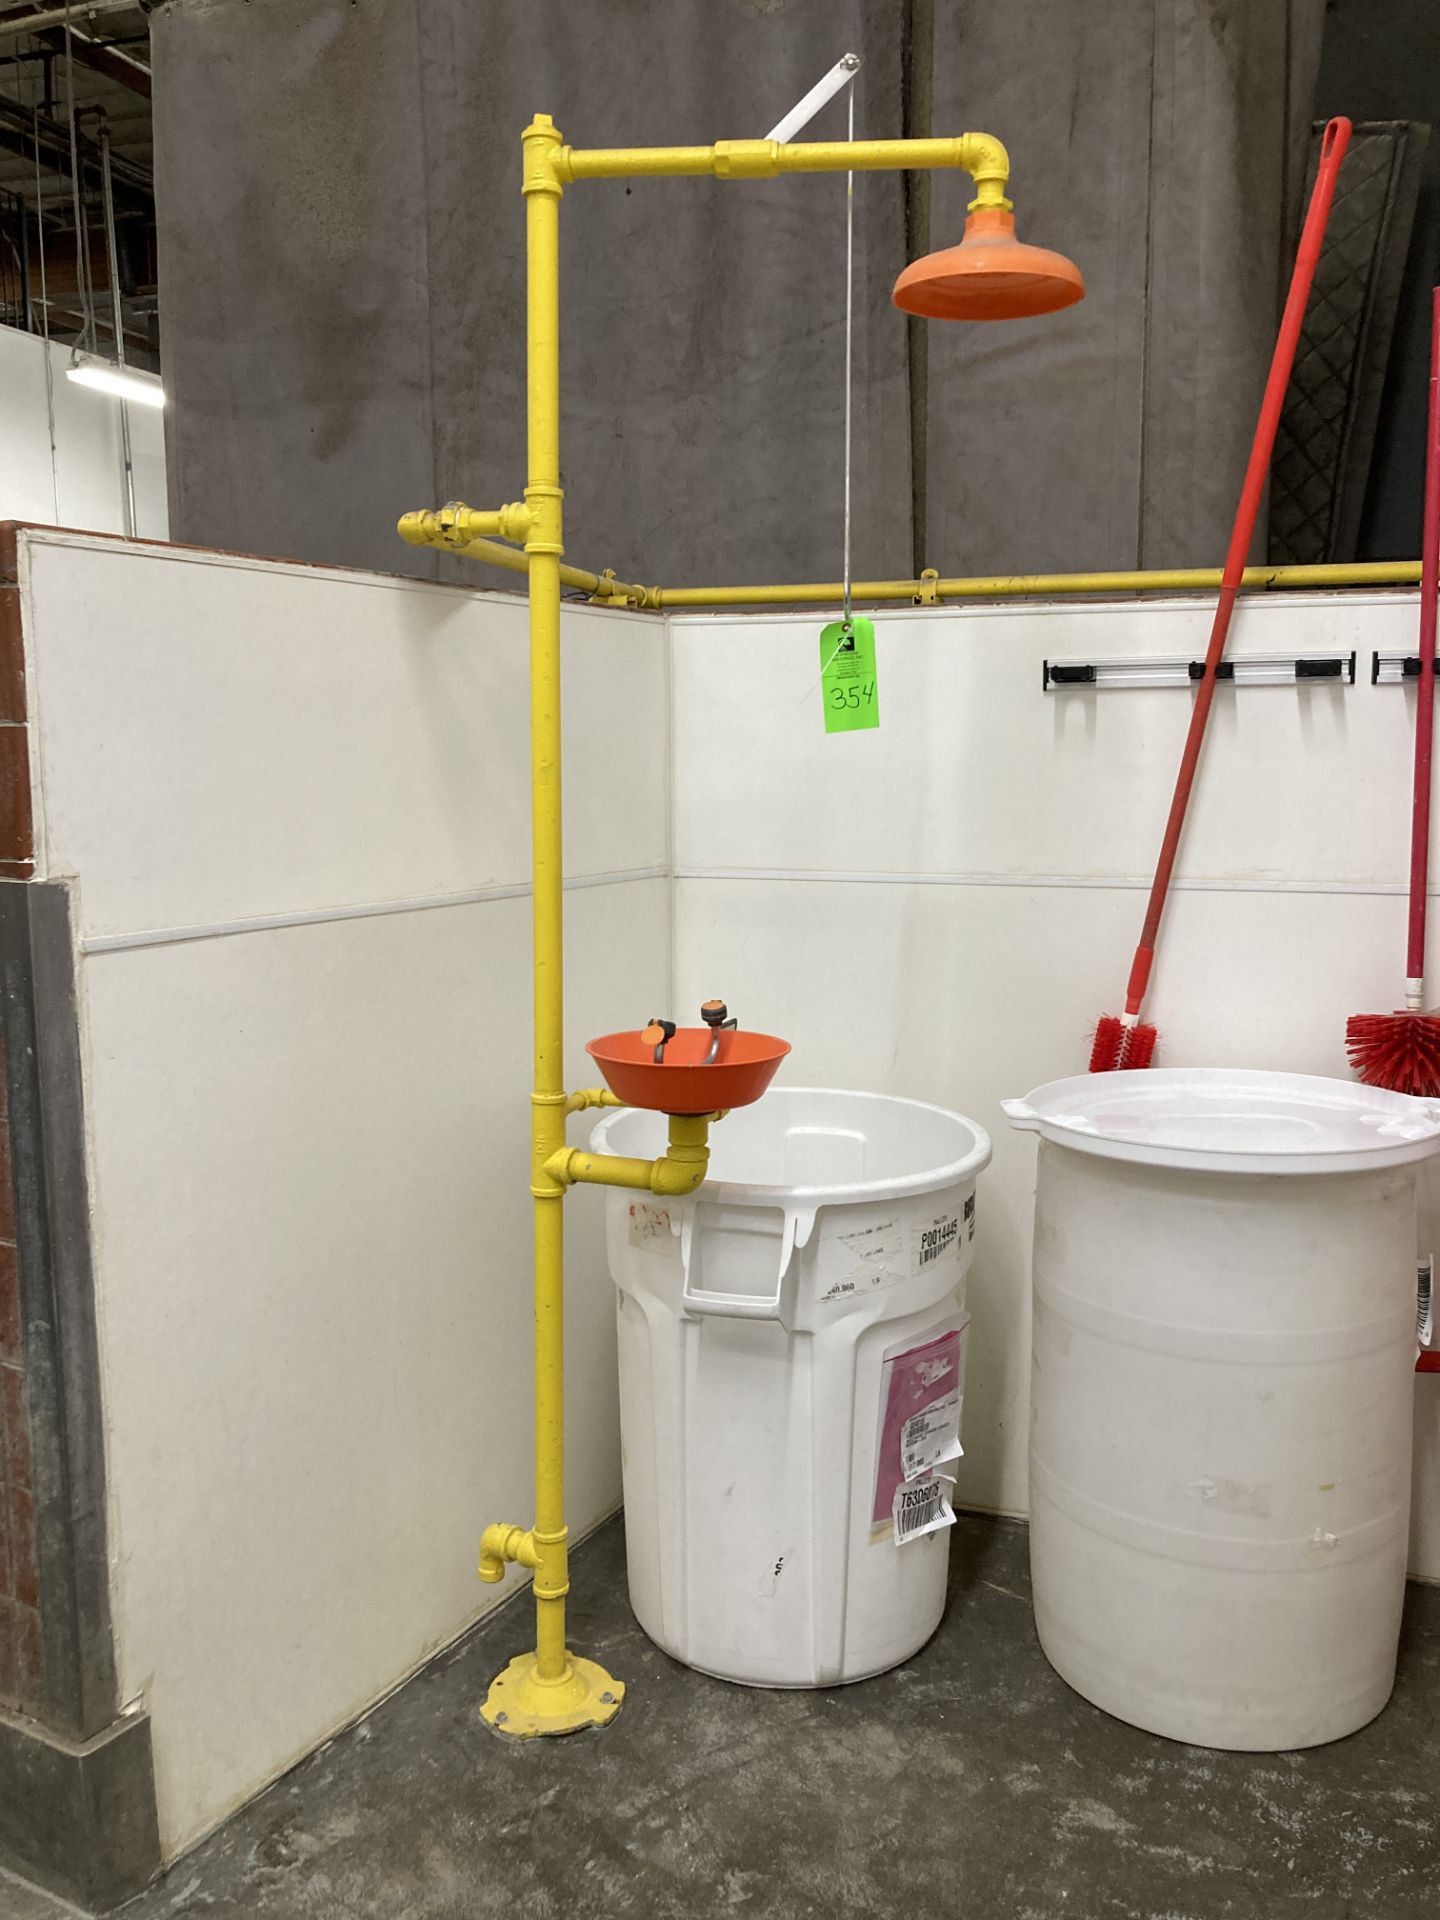 LOT OF waste containers, mop and bucket, brushes, squeegee, wall rack, eye wash shower station - Image 2 of 3